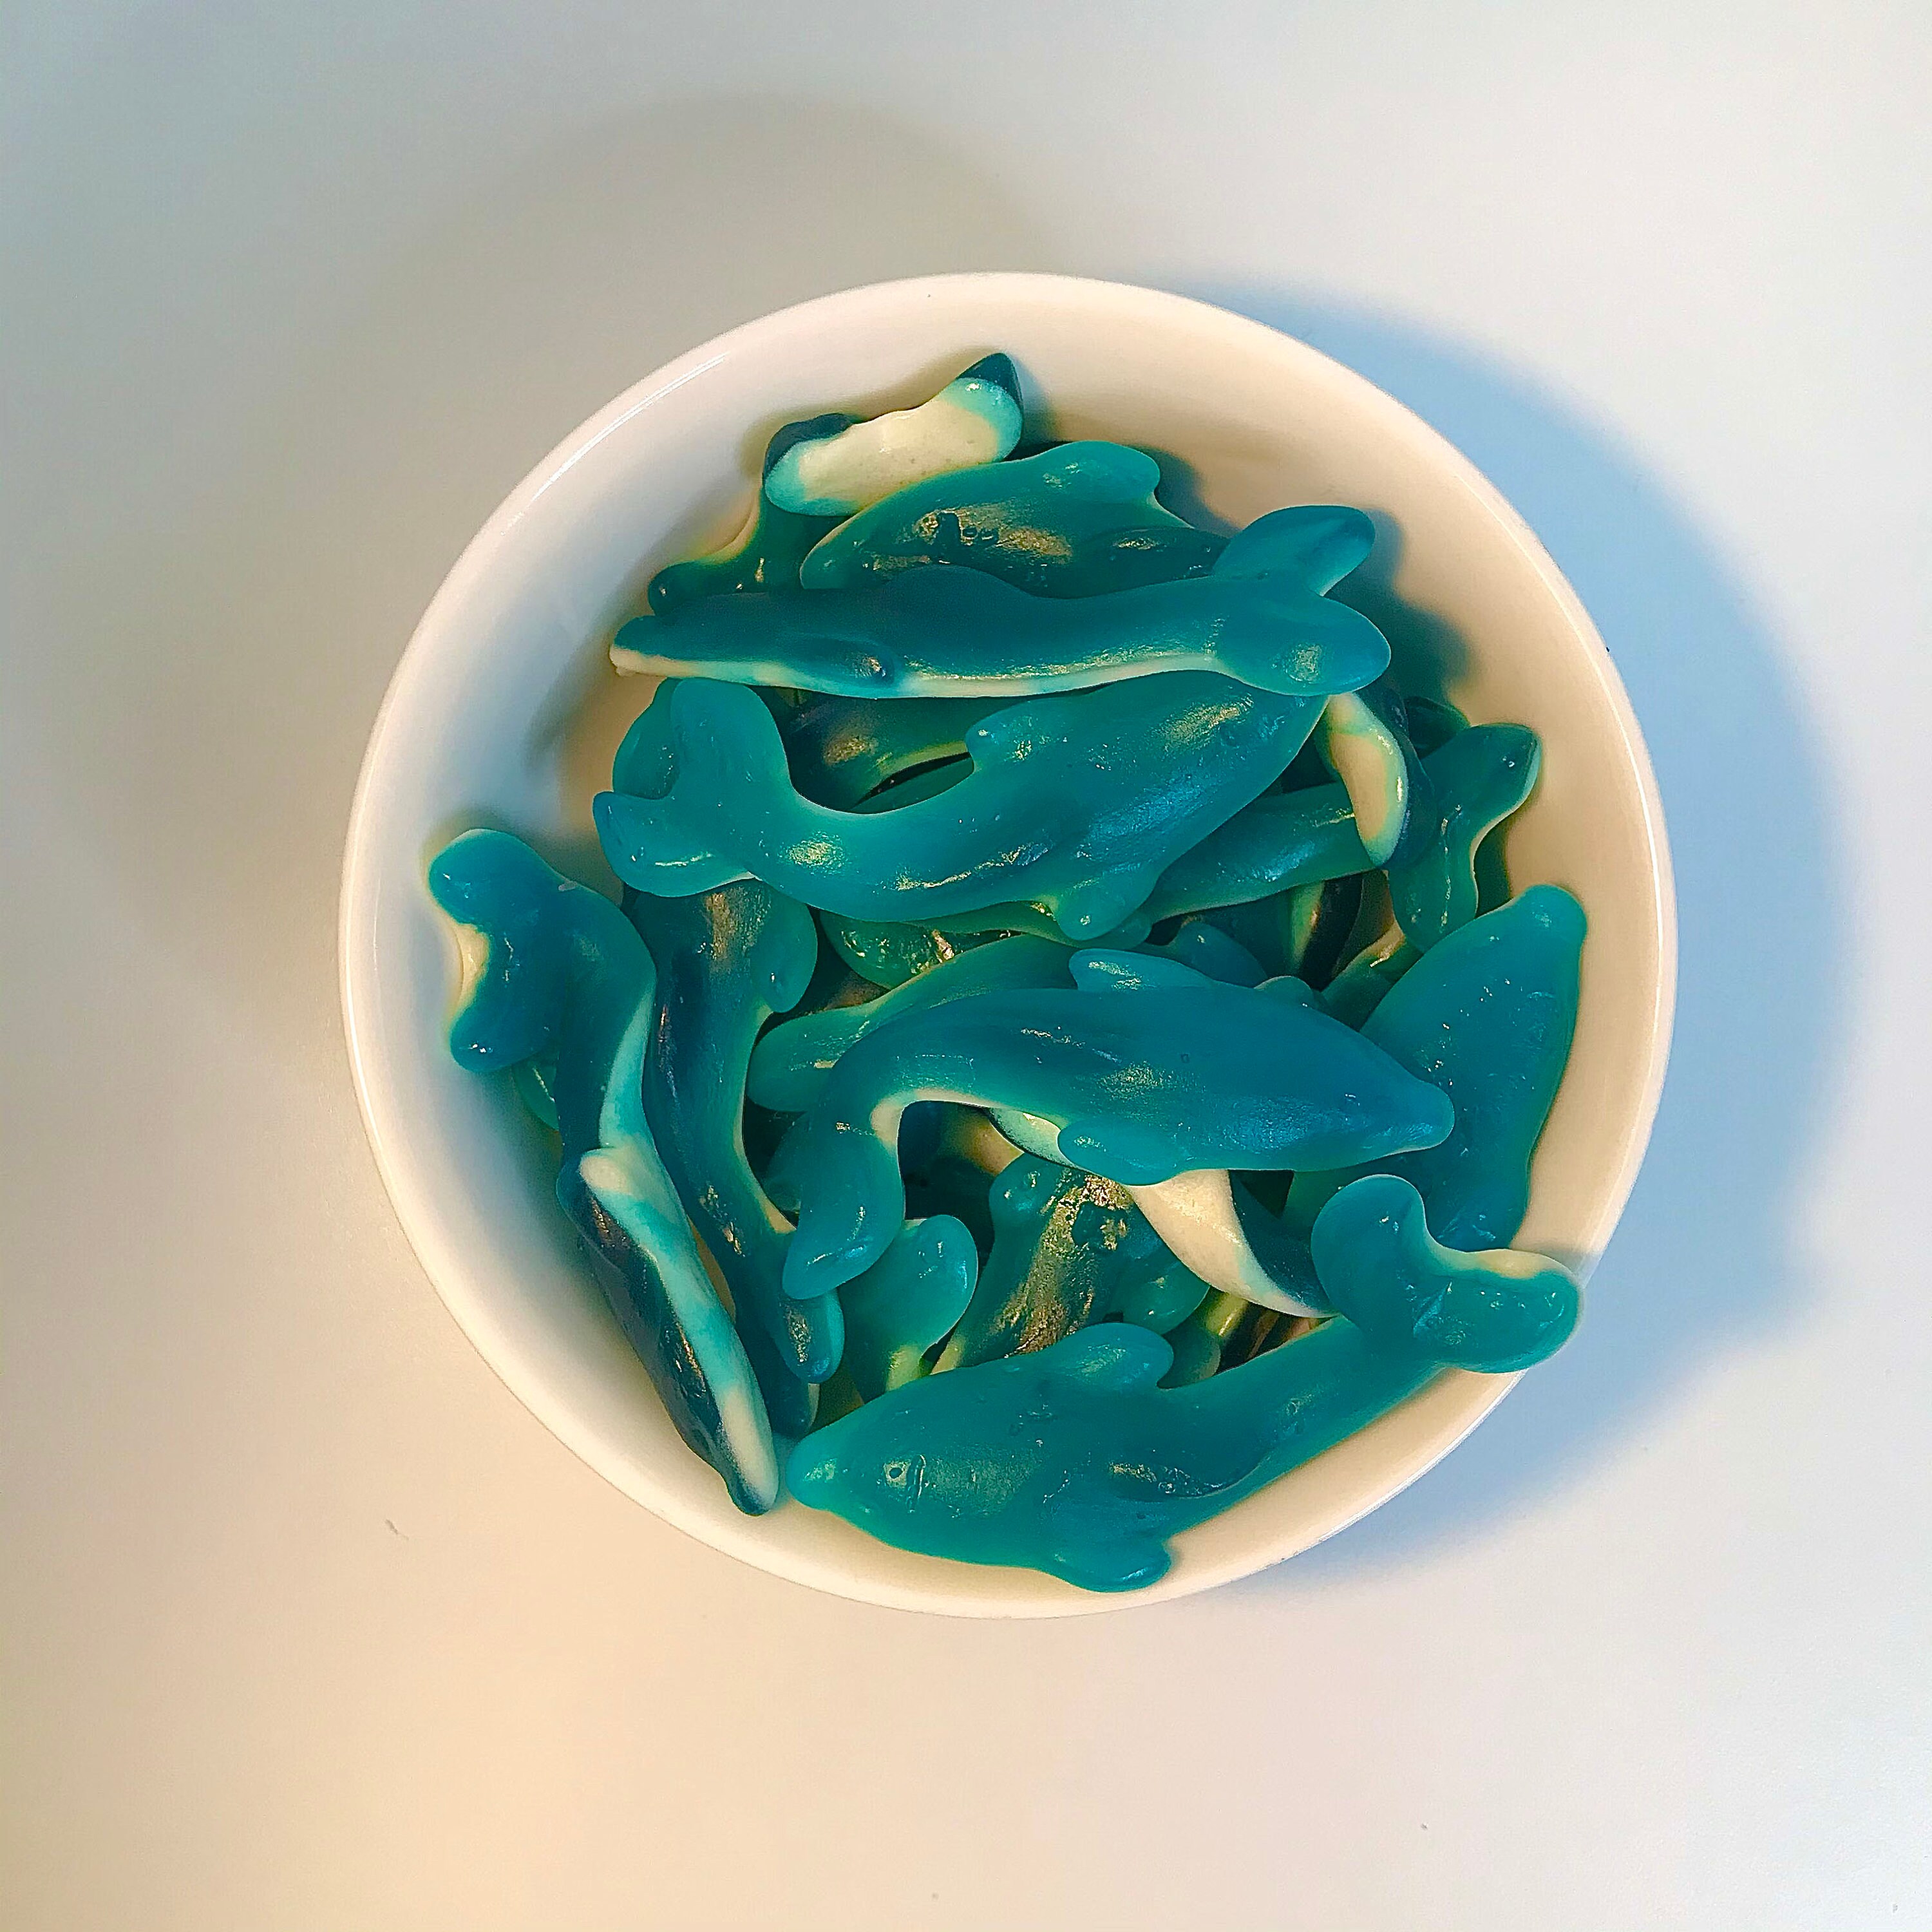 Blue Raspberry Dolphins Sweets 100g 200g 300g 400g 500g | Etsy